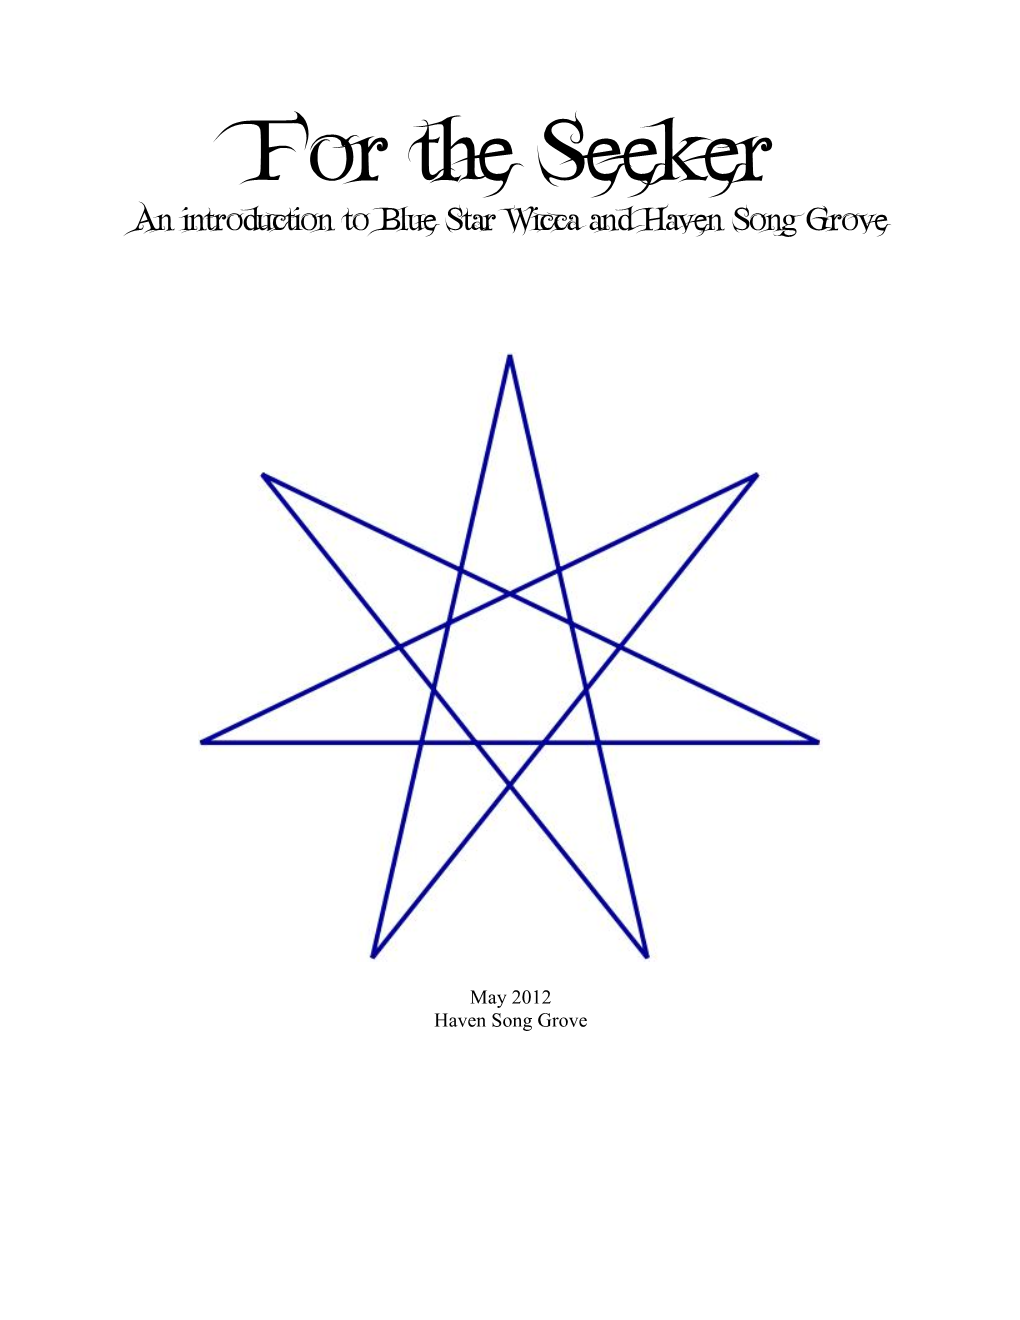 For the Seeker an Introduction to Blue Star Wicca and Haven Song Grove